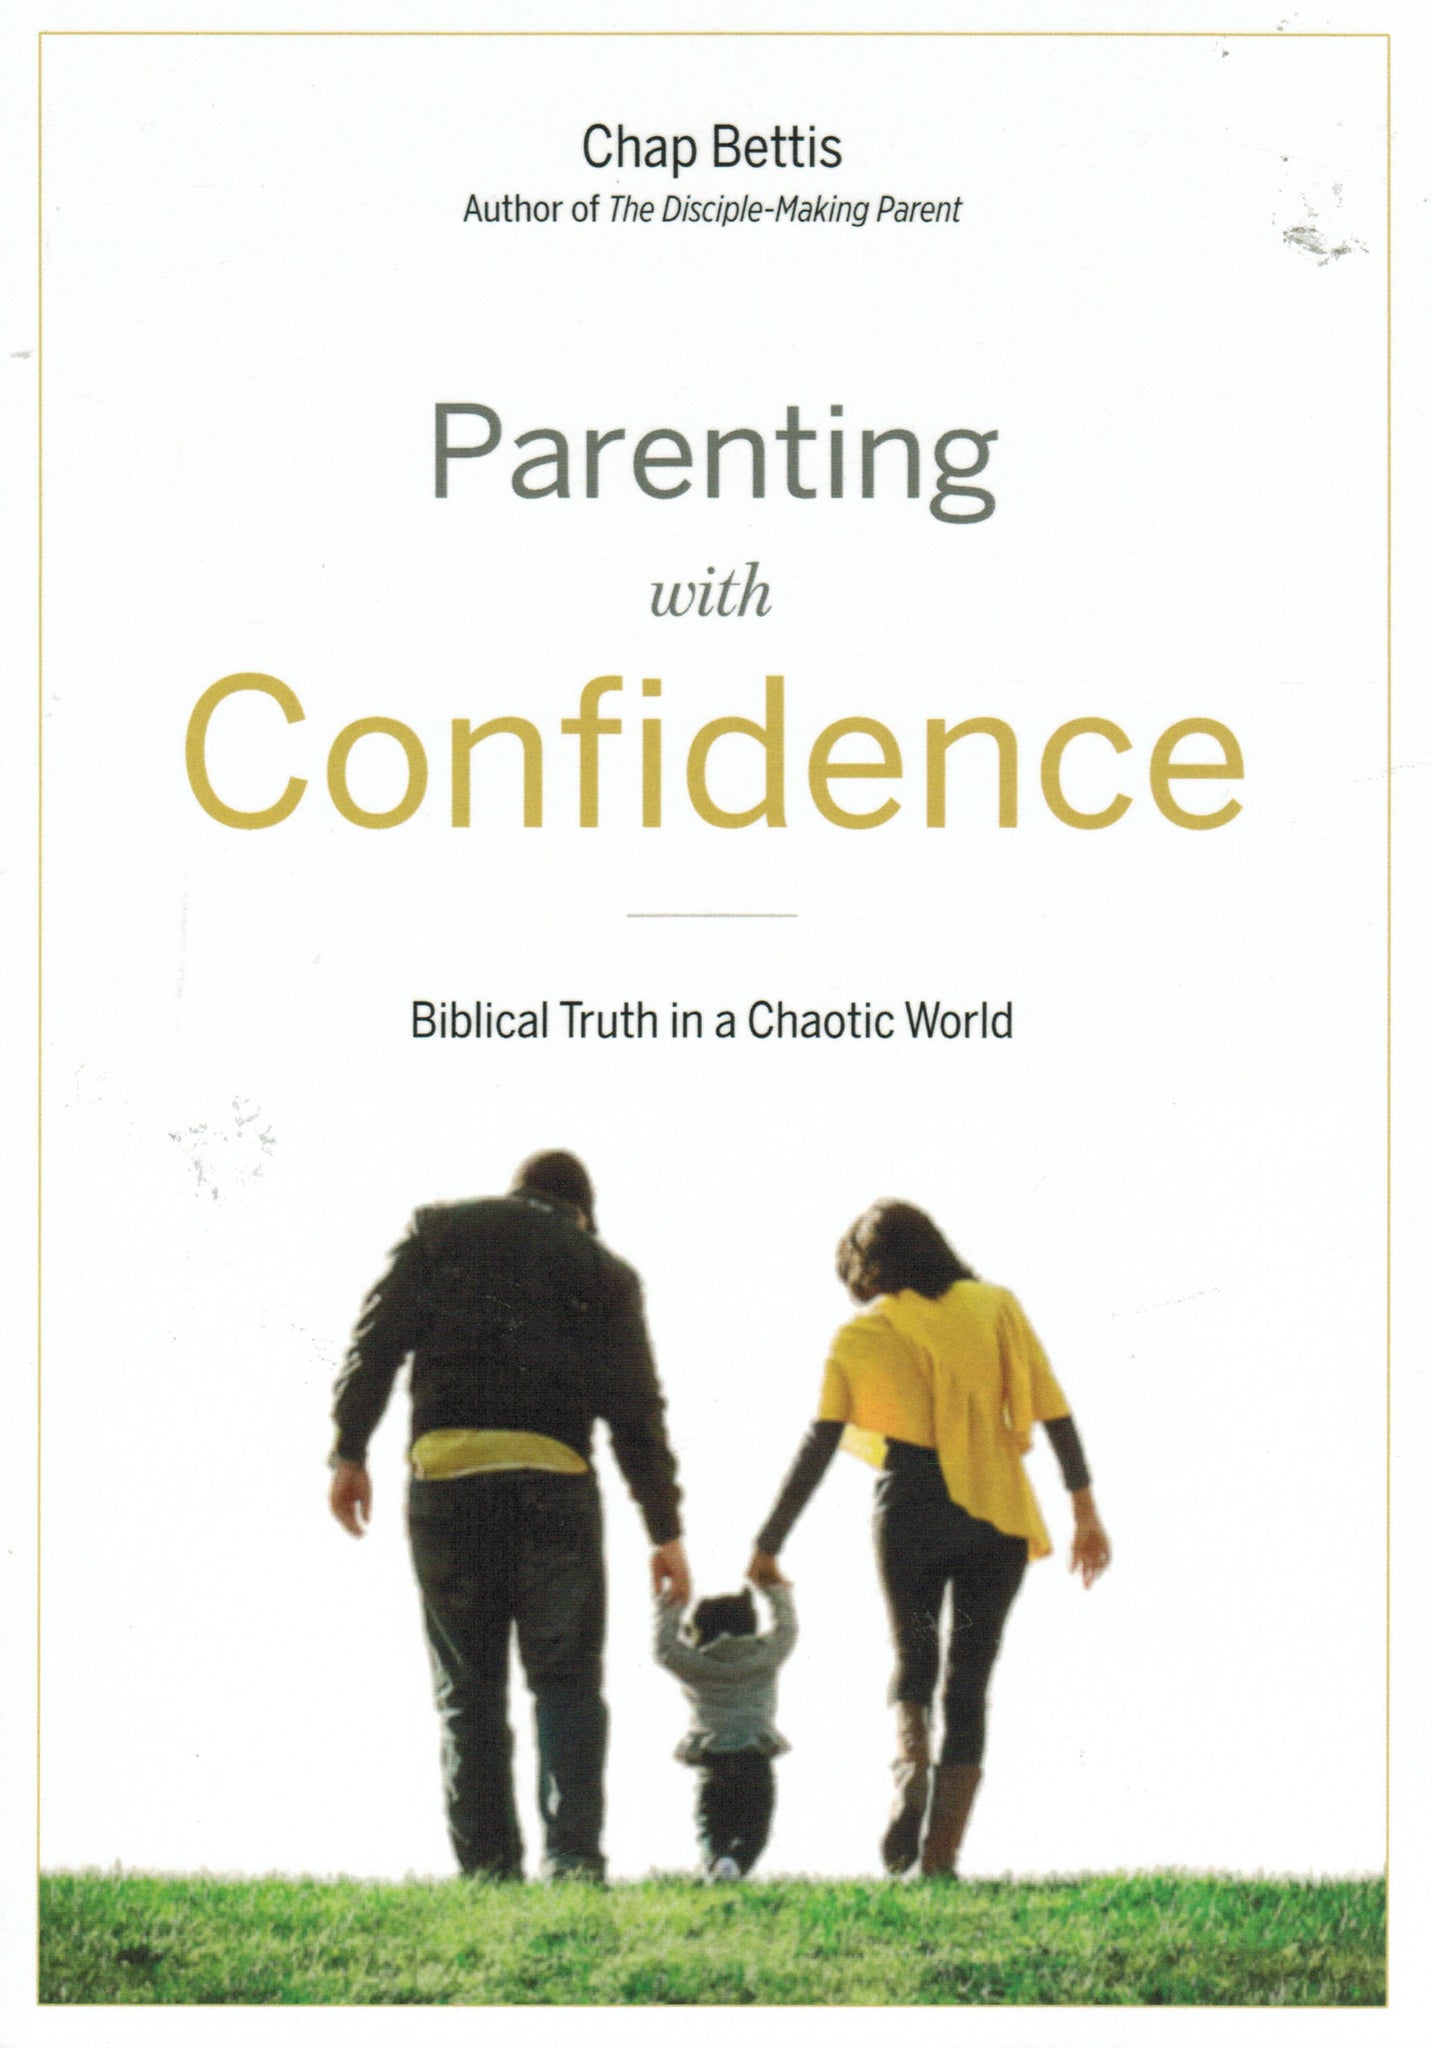 Parenting with Confidence: Biblical Truth in a Chaotic World